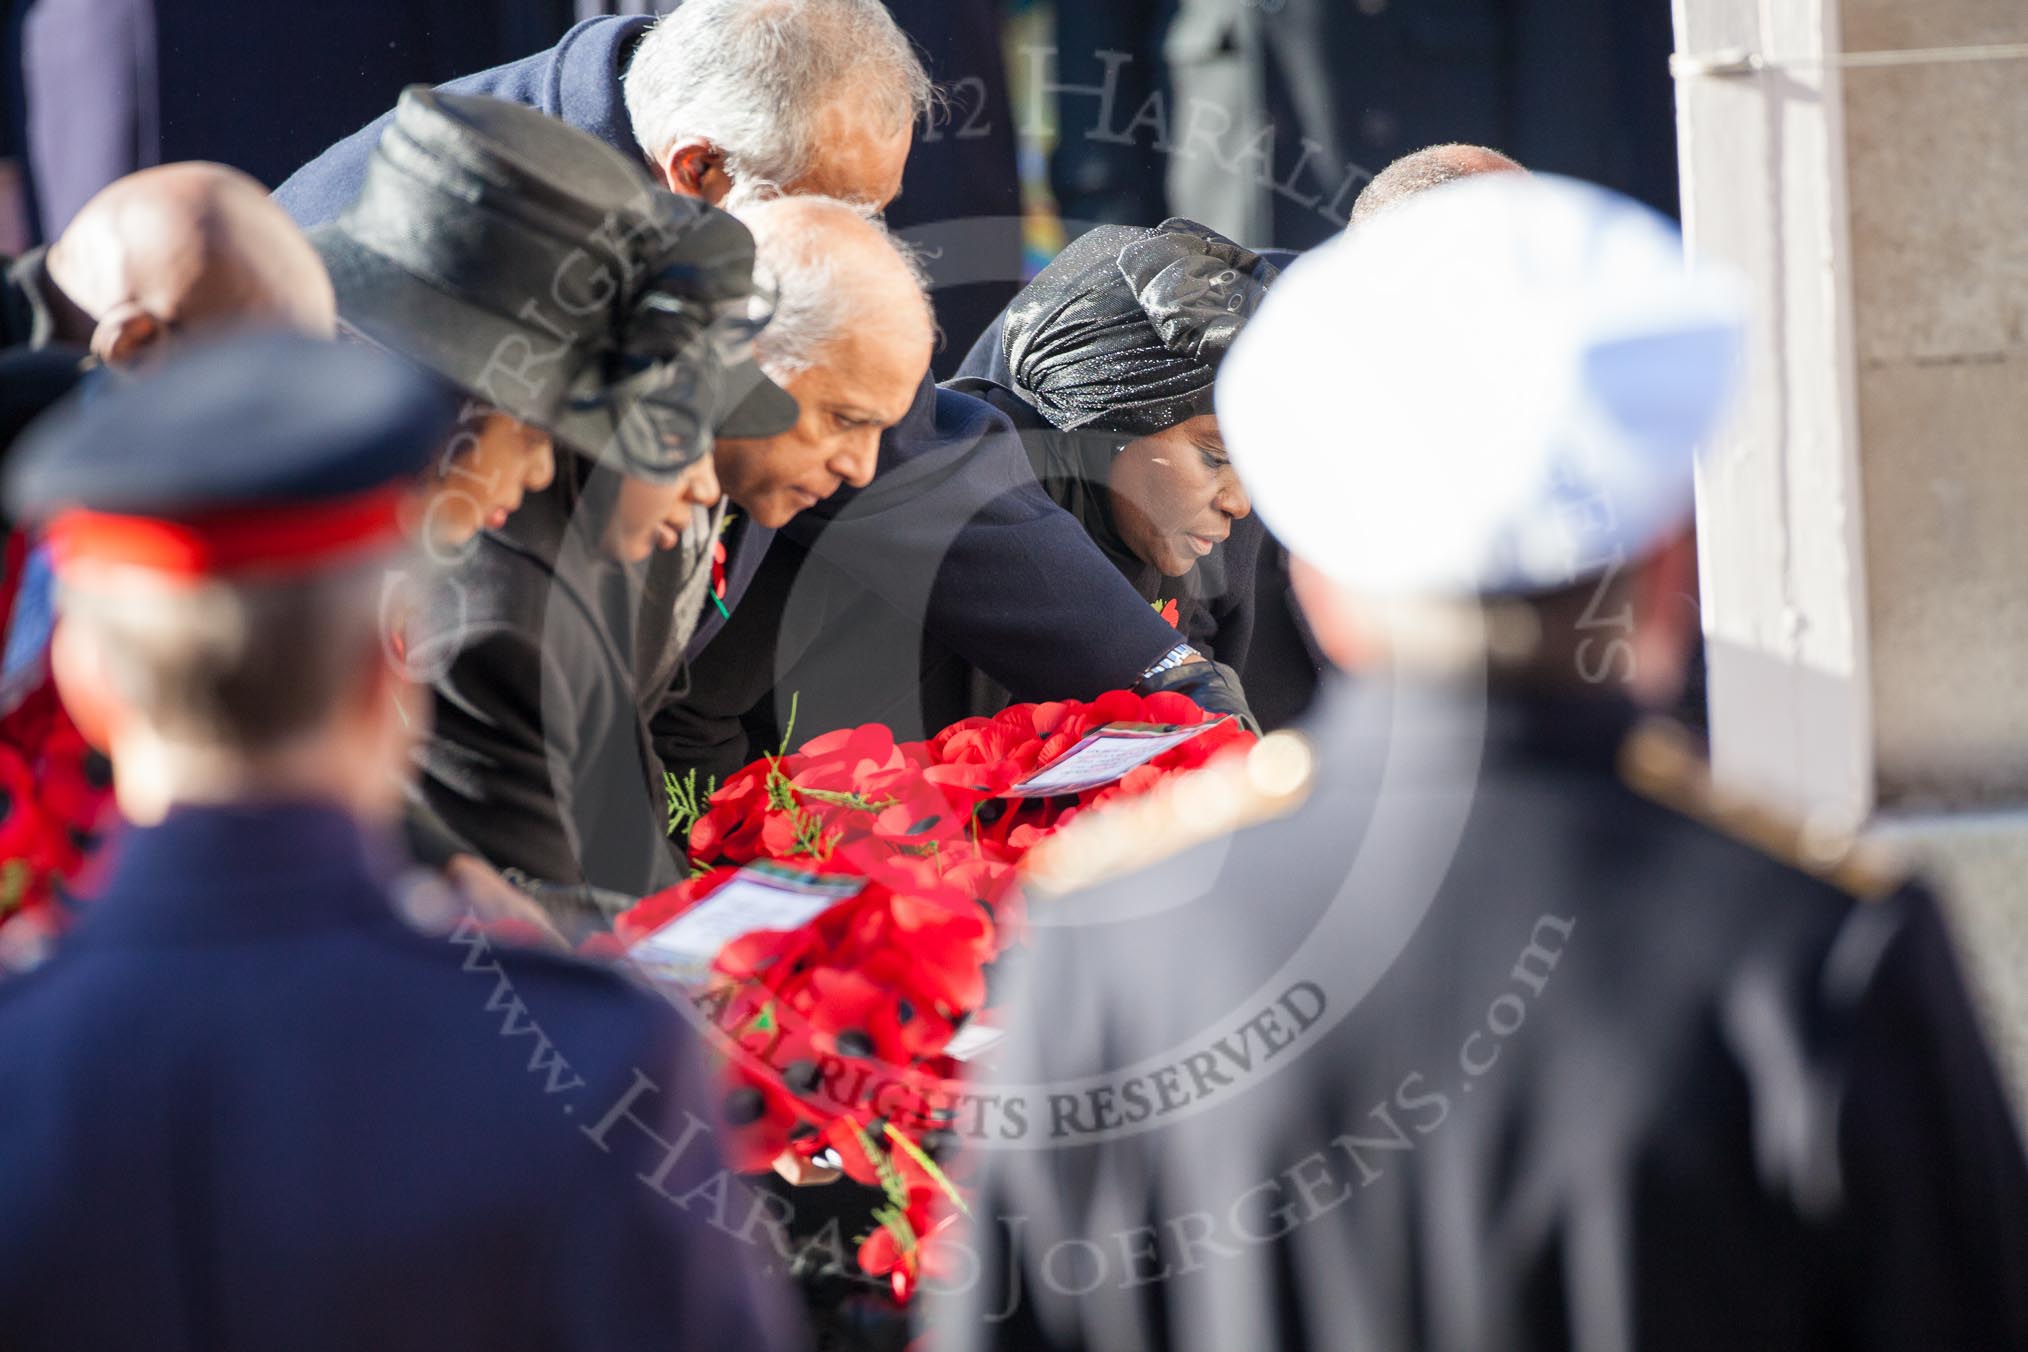 The High Comissioners for Mauritius, Barbados, Lesotho, Botswana, Guyana, Singapore, The Gambia, Zambia, and Malta laying their wreaths at the Cenotaph.